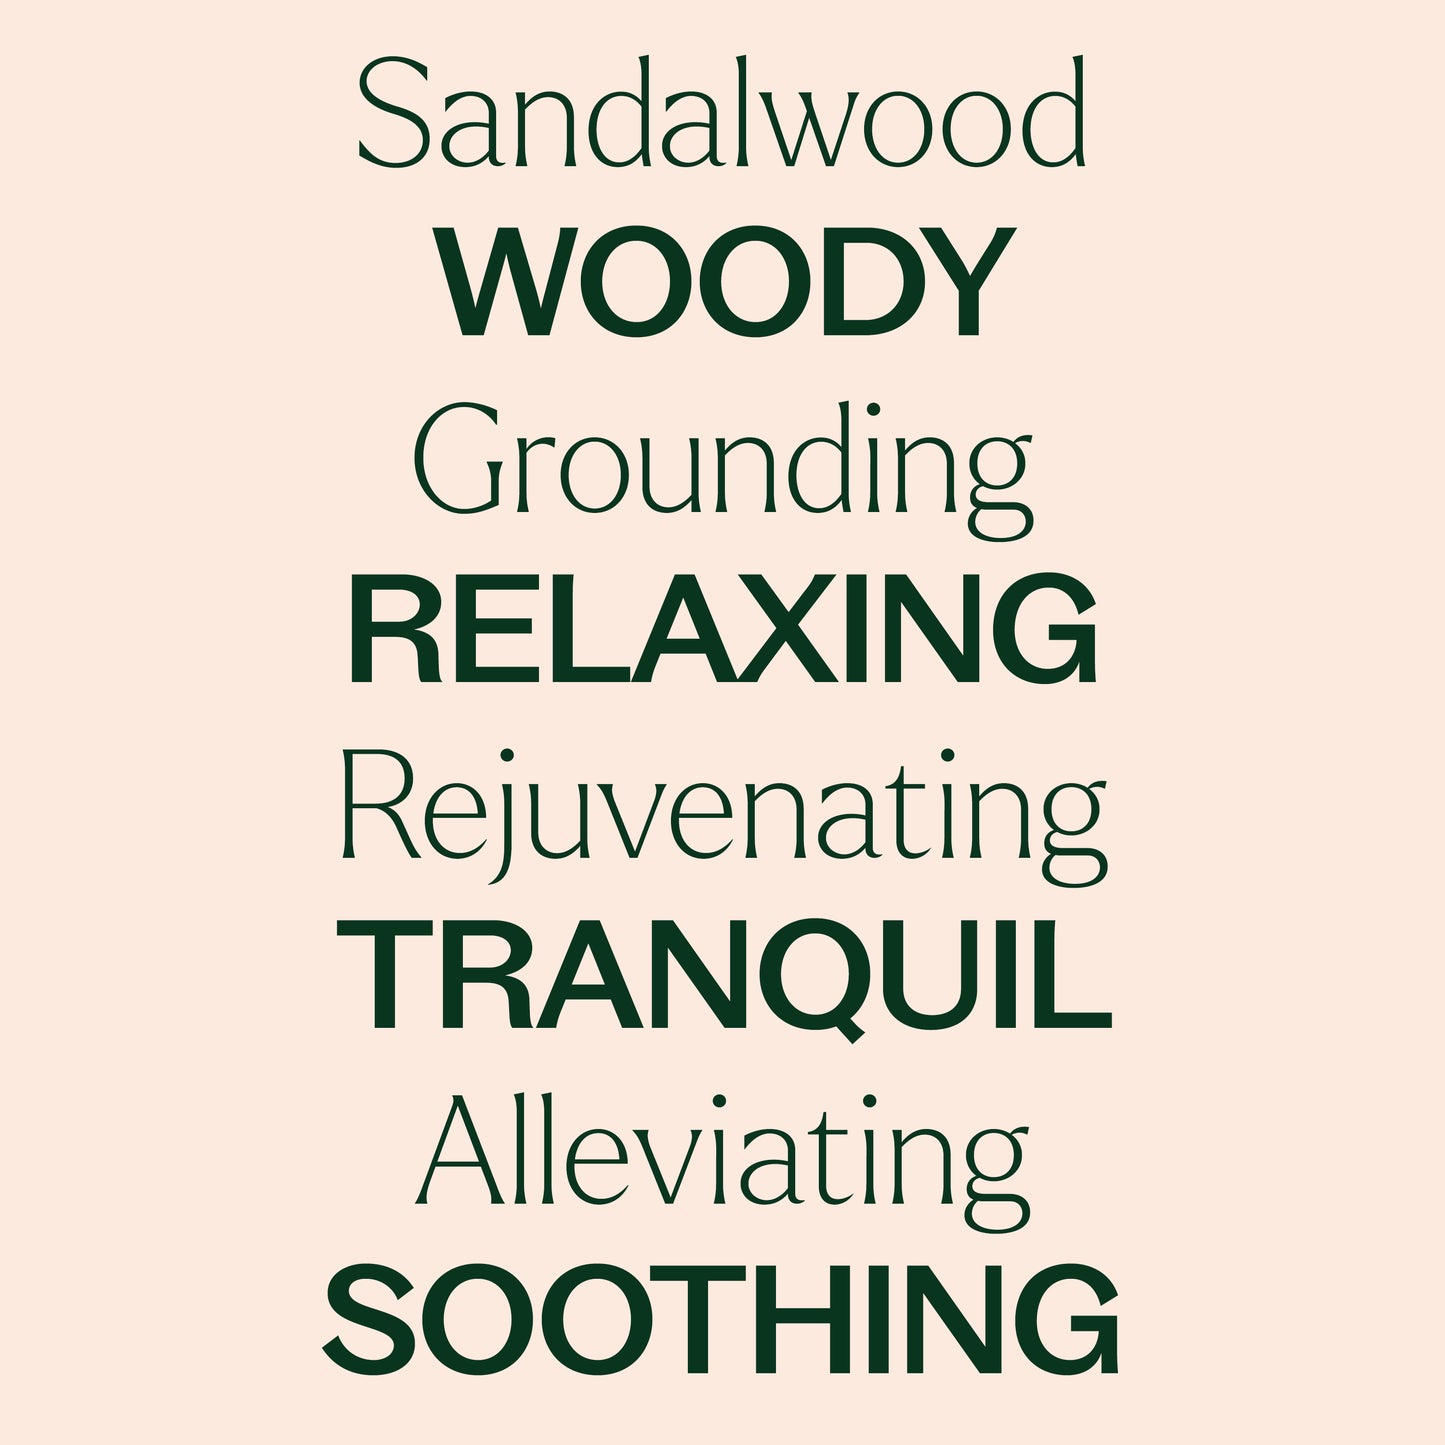 Australian Sandalwood Essential Oil key features. Woody, grounding, relaxing, rejuvenating, tranquil, alleviating, soothing